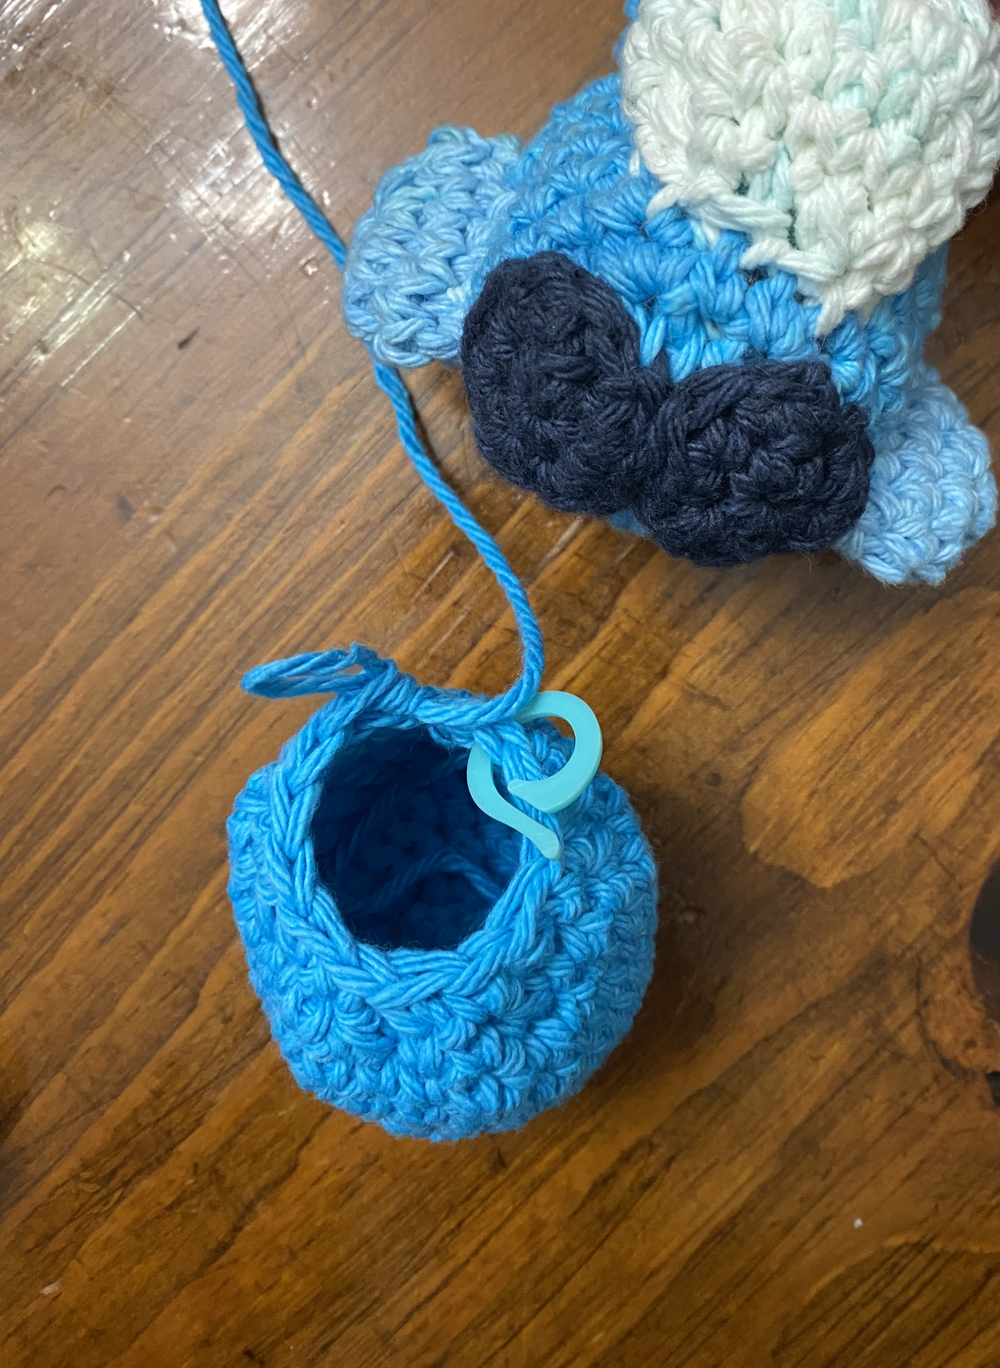 How to Crochet: Stuffing Bombs